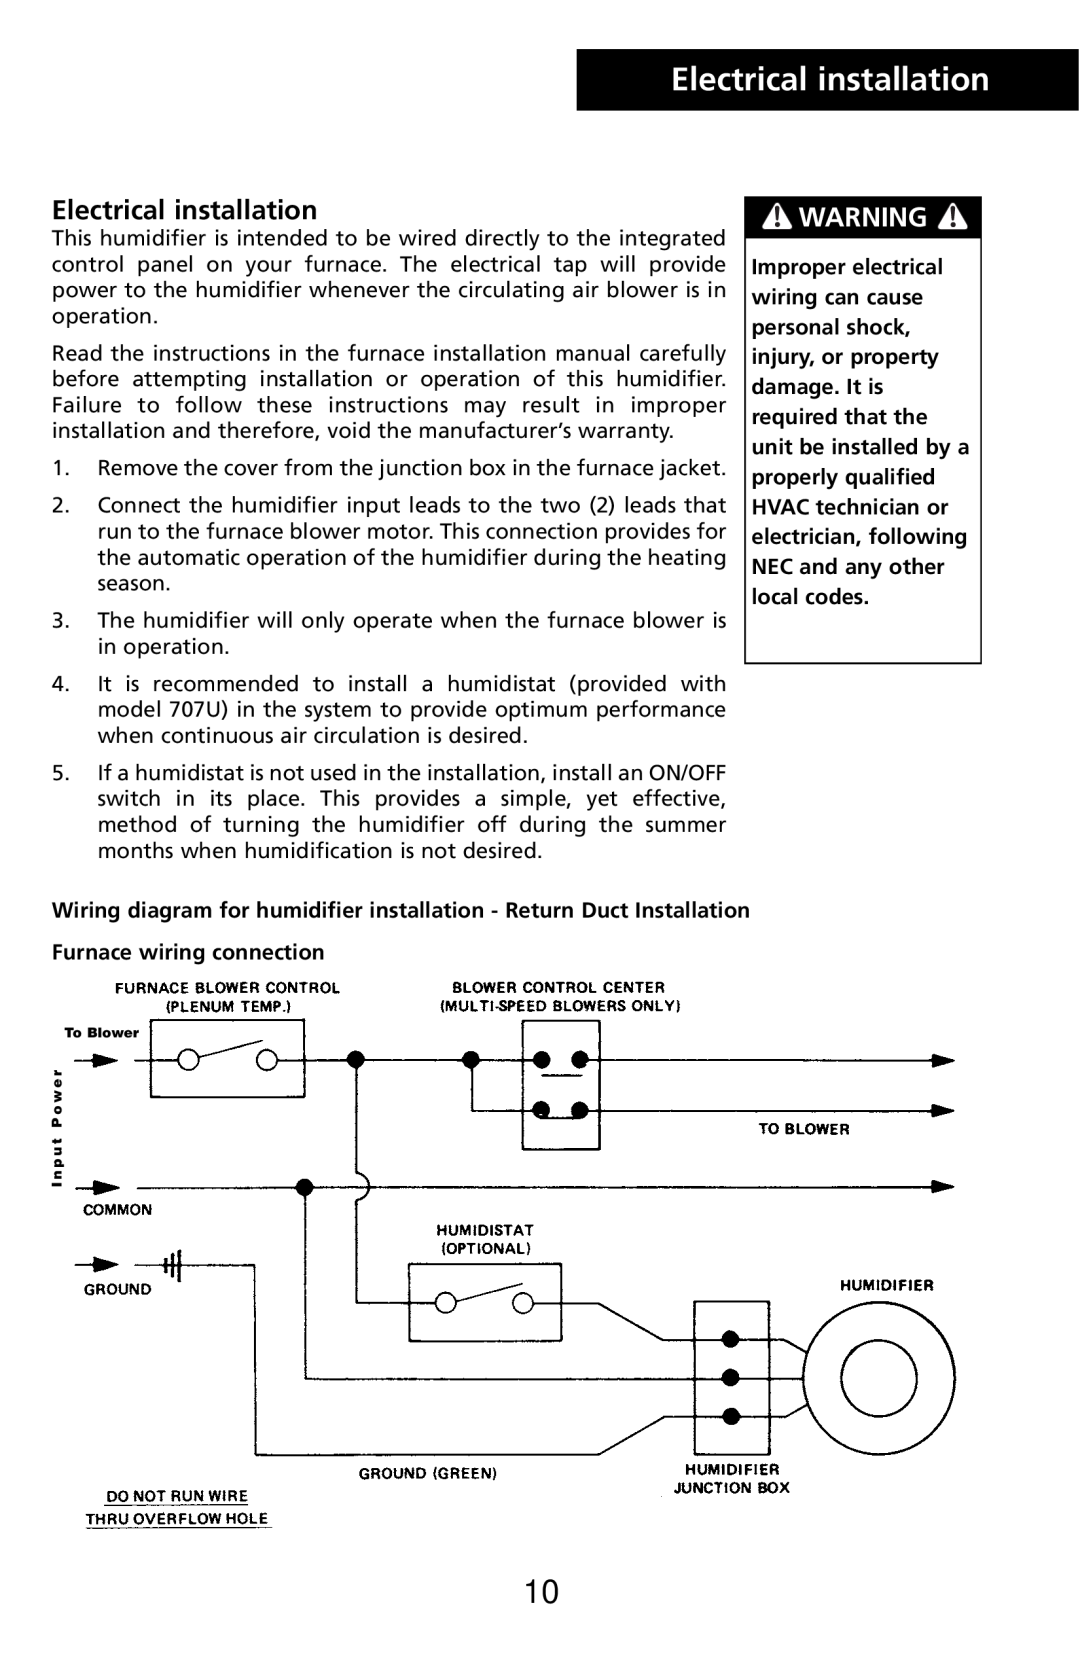 Herrmidifier Co 707U-UK specifications Electrical installation, Furnace wiring connection 